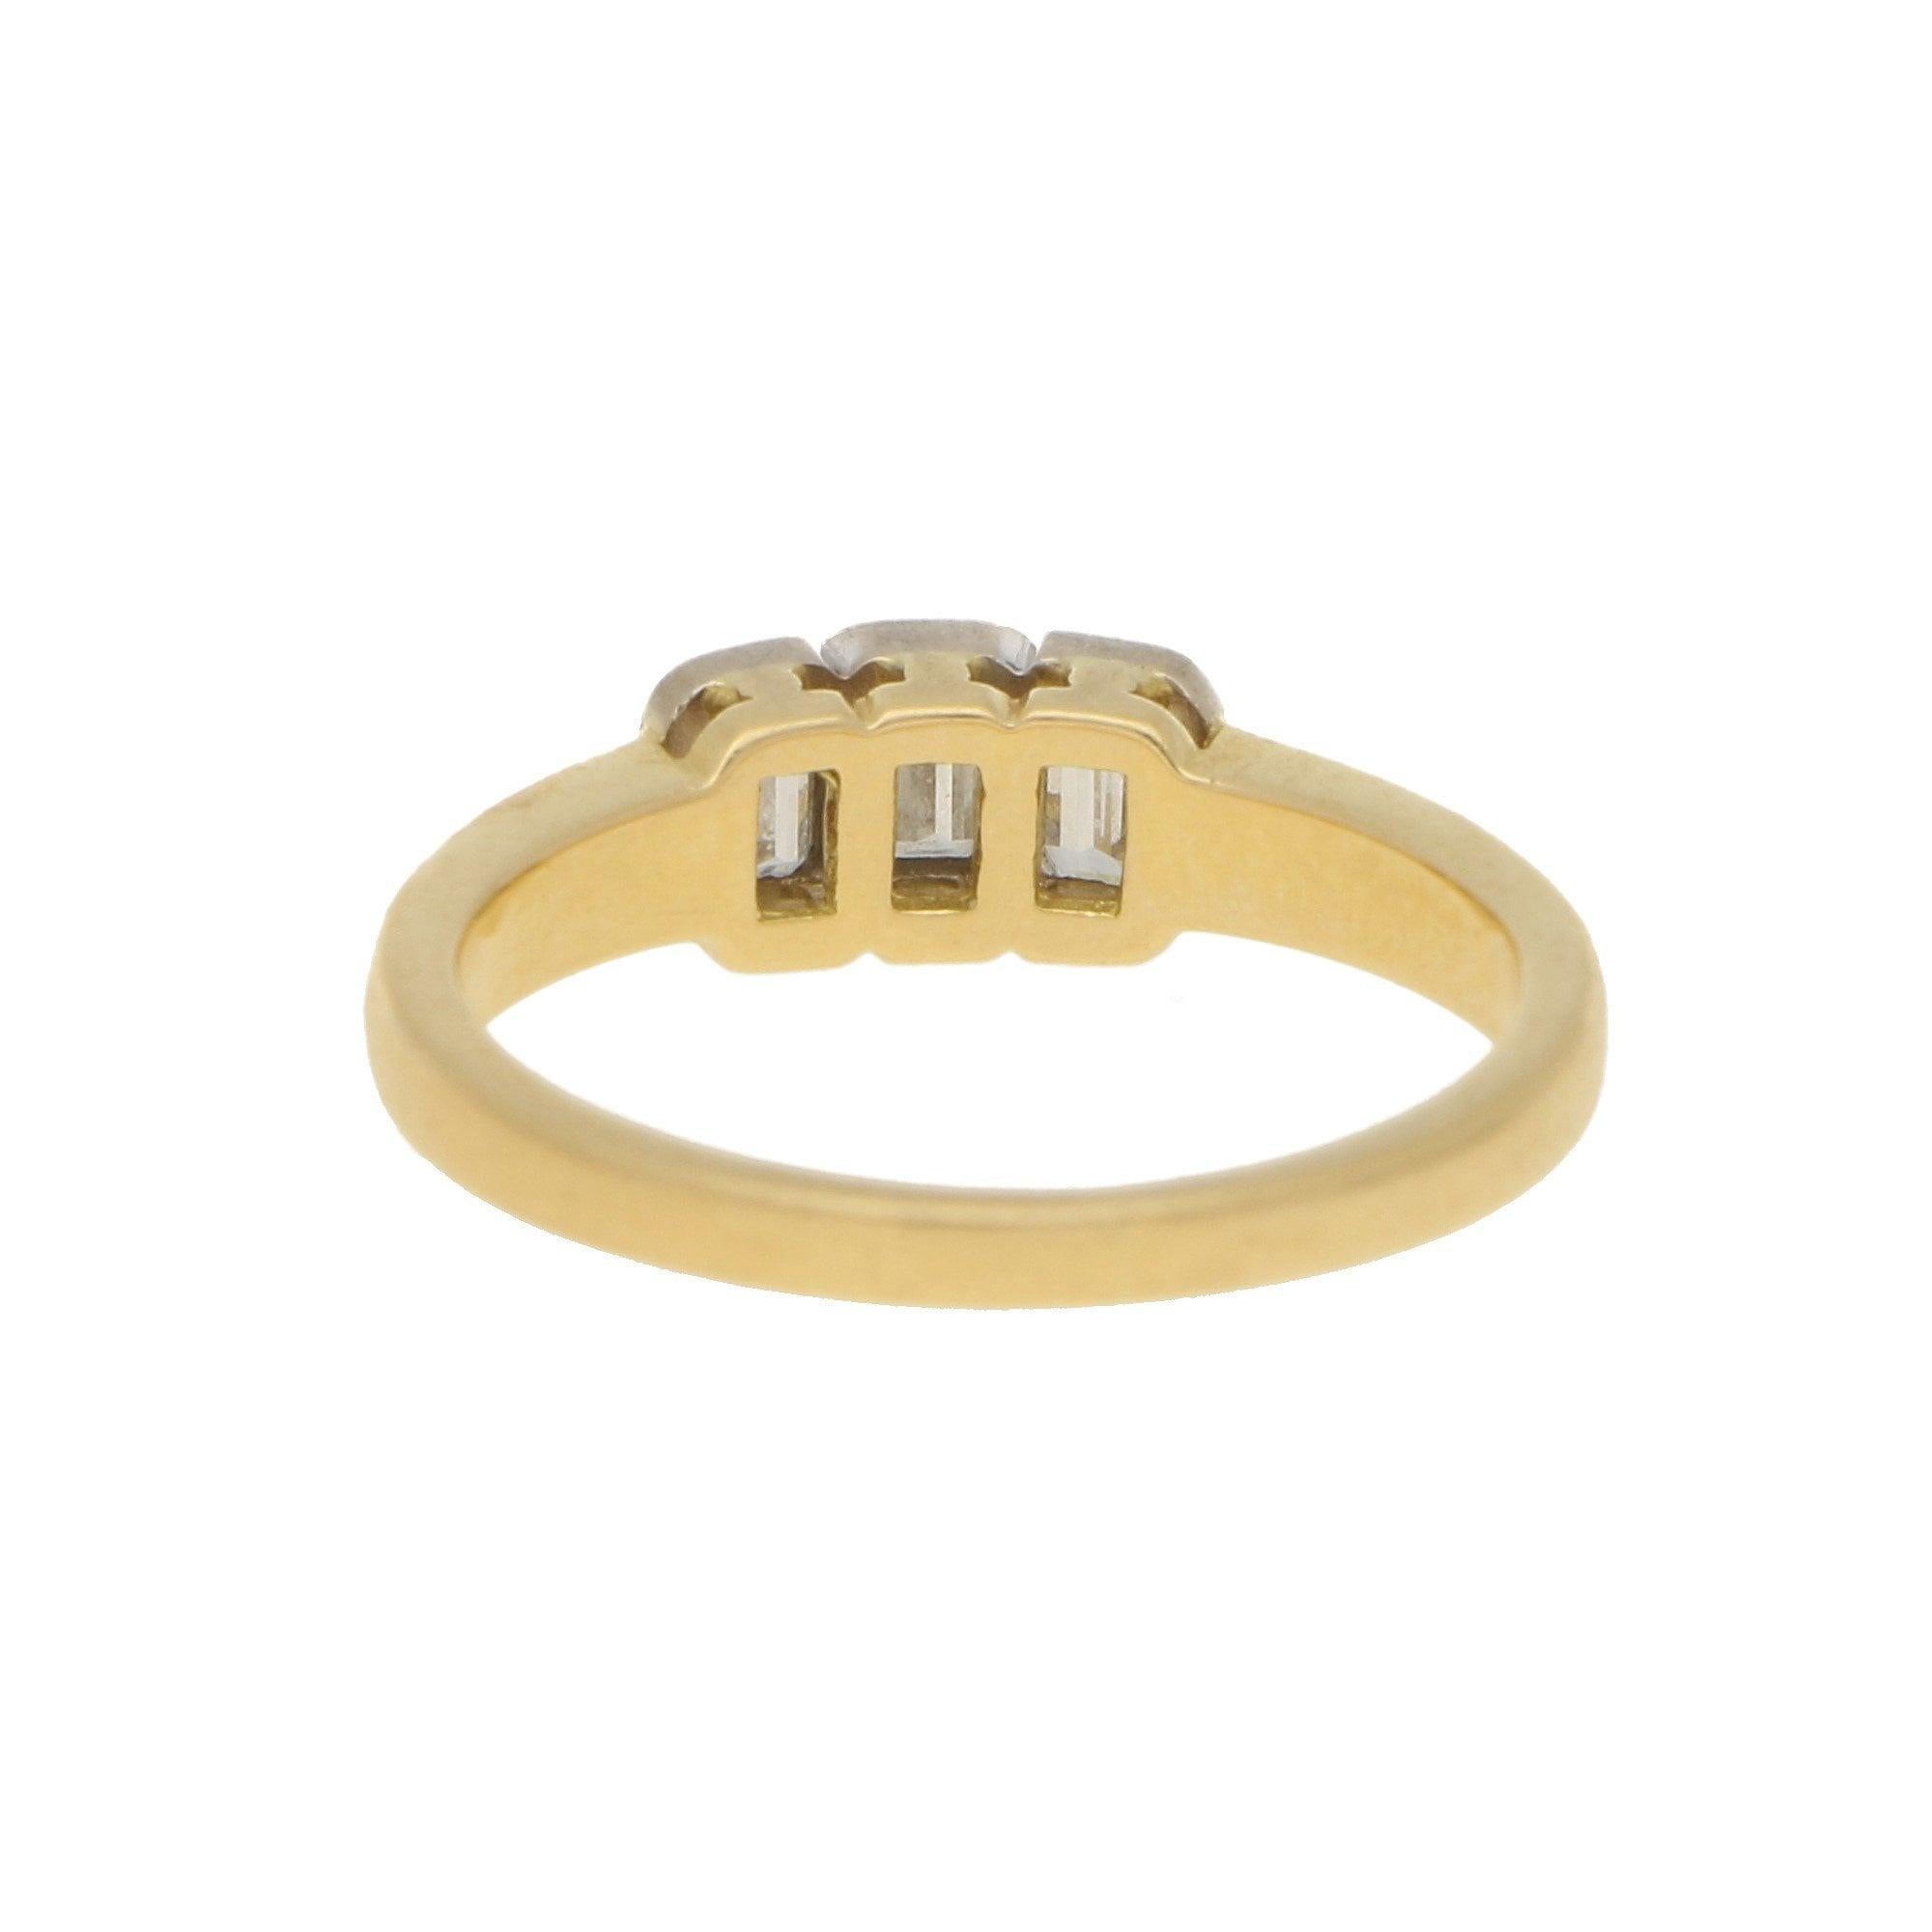 Emerald Cut Emerald-Cut Diamond Three-Stone Engagement Ring in 18k Yellow and White Gold